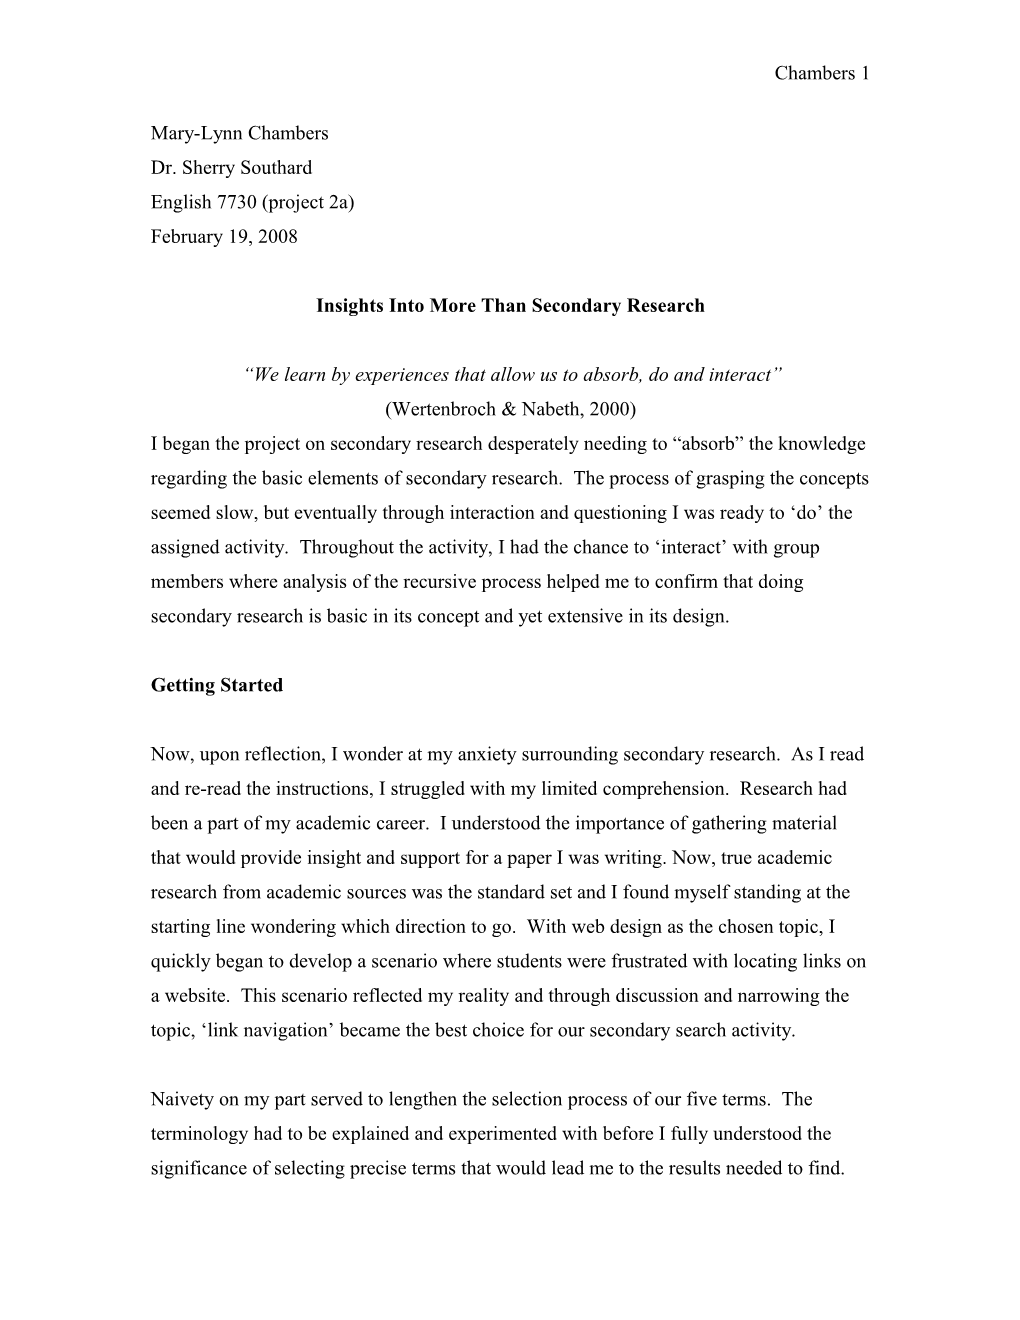 Reflection Paper on Secondary Research Project